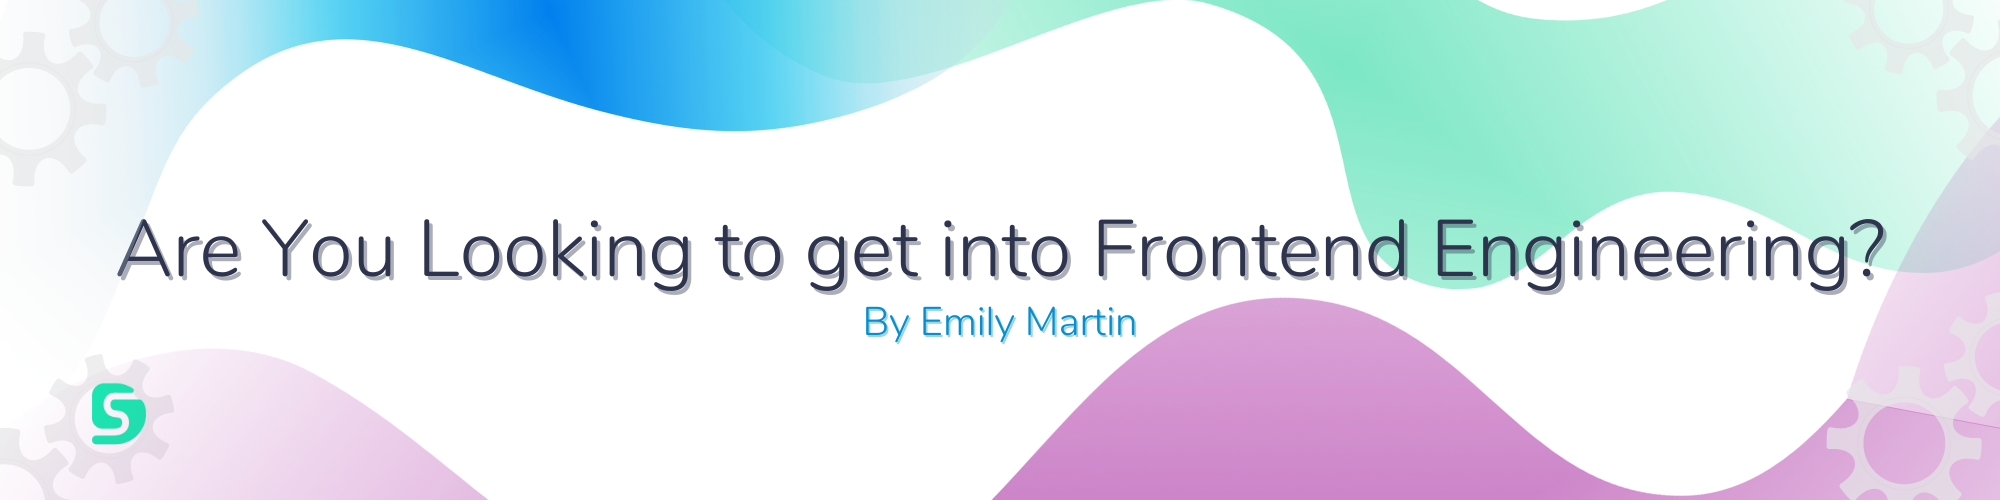 Are You Looking to get into Frontend Engineering? 